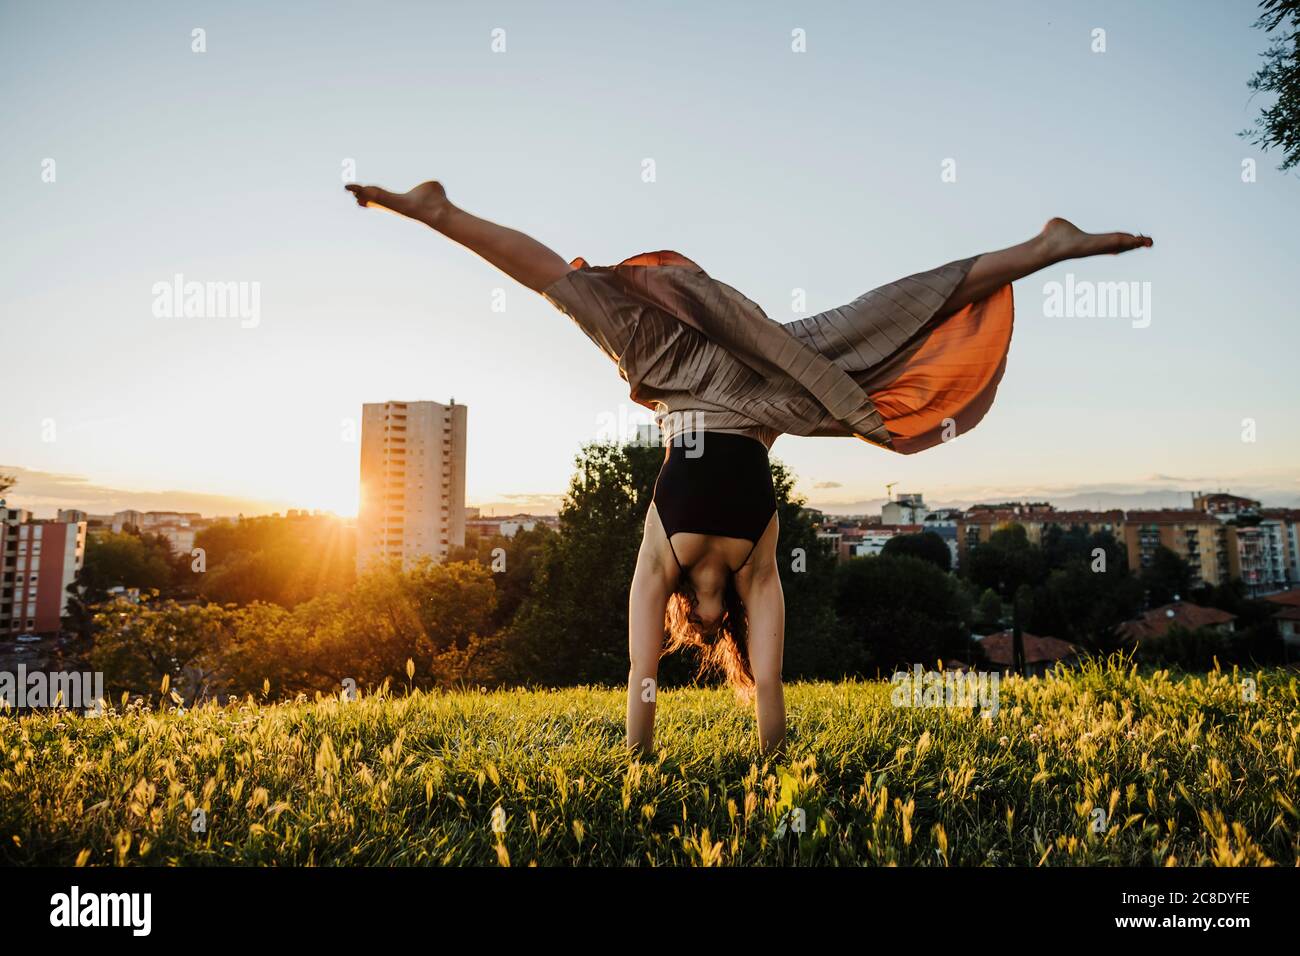 Young woman performing handstand at city park during sunset Stock Photo